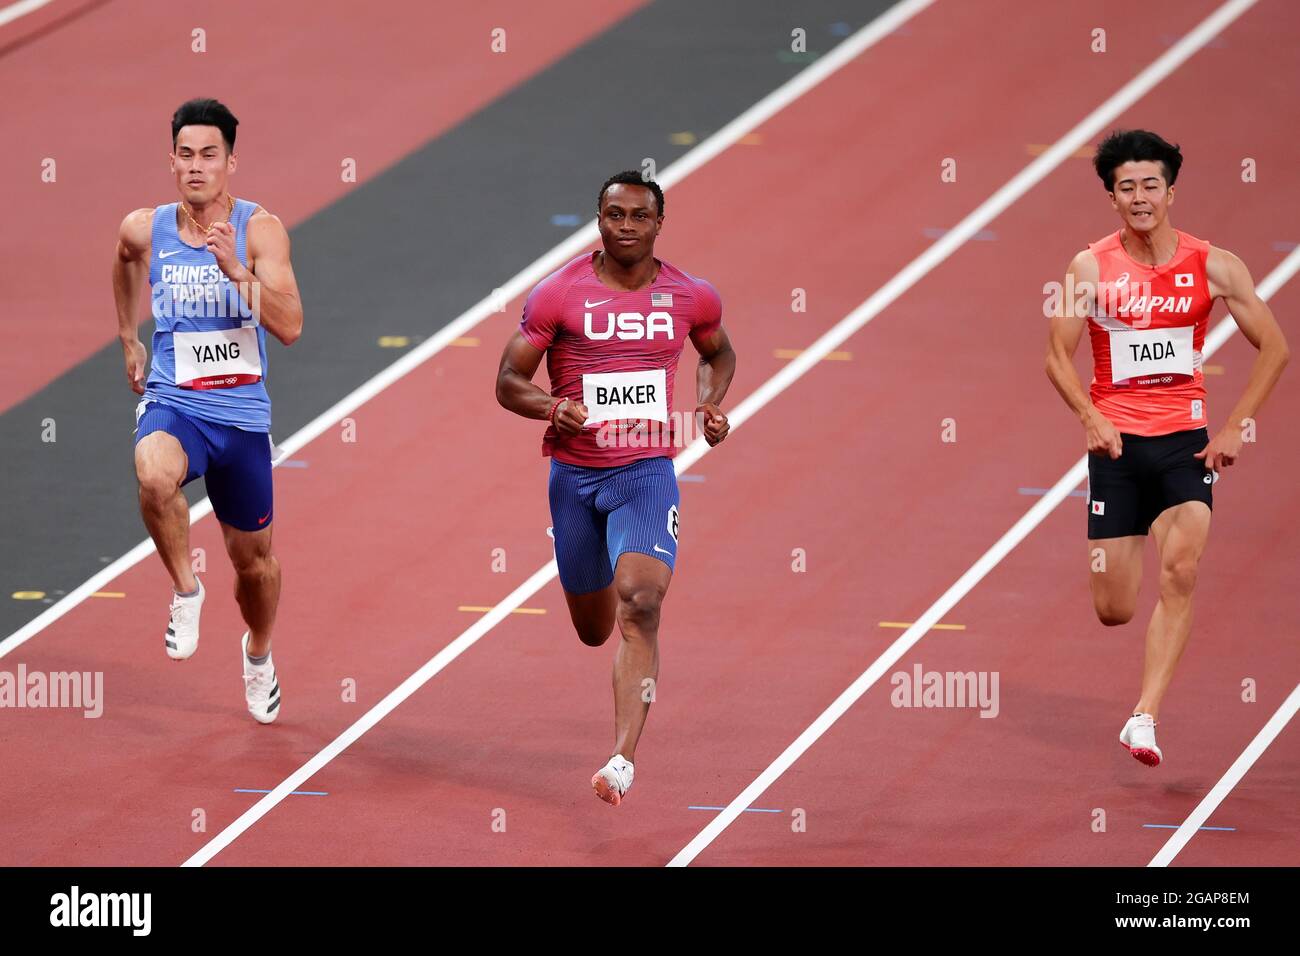 Tokyo, Japan, 31 July, 2021. Ronnie Baker of Team United States wins his Men's 100m Heat on Day 8 of the Tokyo 2020 Olympic Games. Credit: Pete Dovgan/Speed Media/Alamy Live News. Credit: Pete Dovgan/Speed Media/Alamy Live News Stock Photo